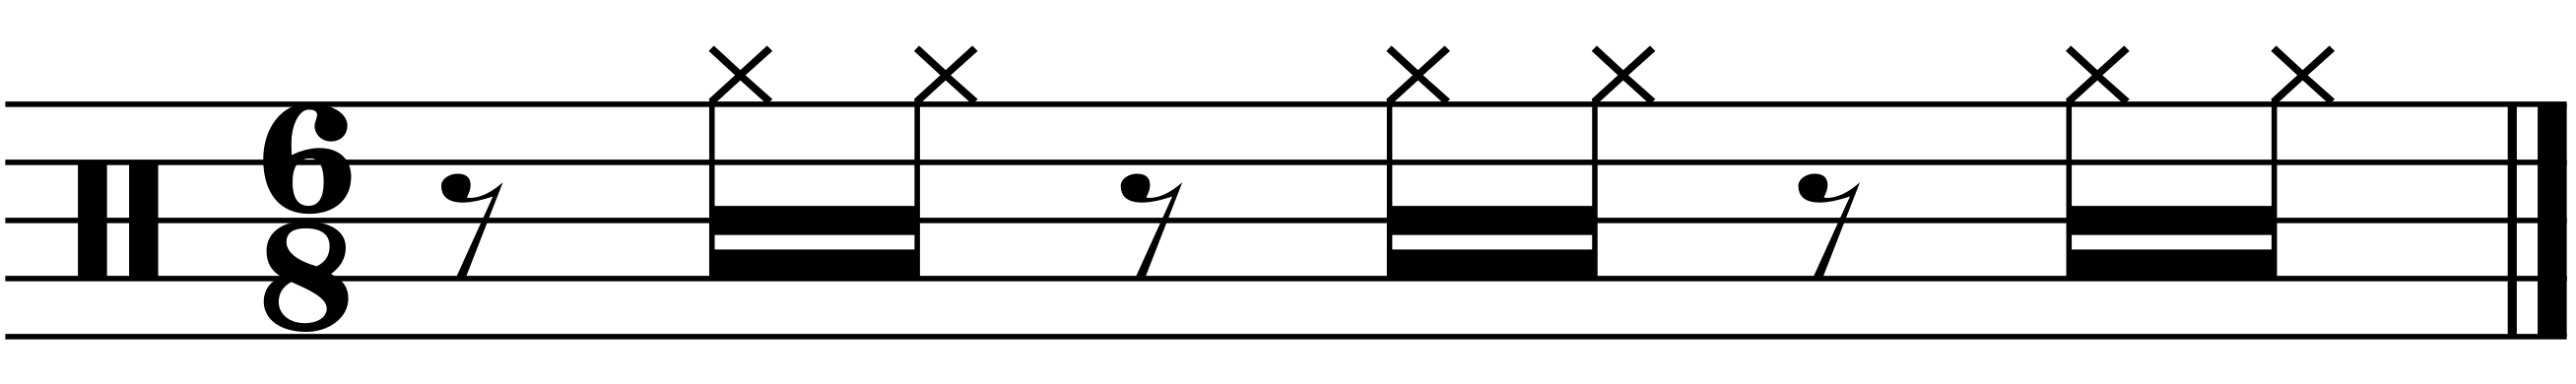 The basis for this groove